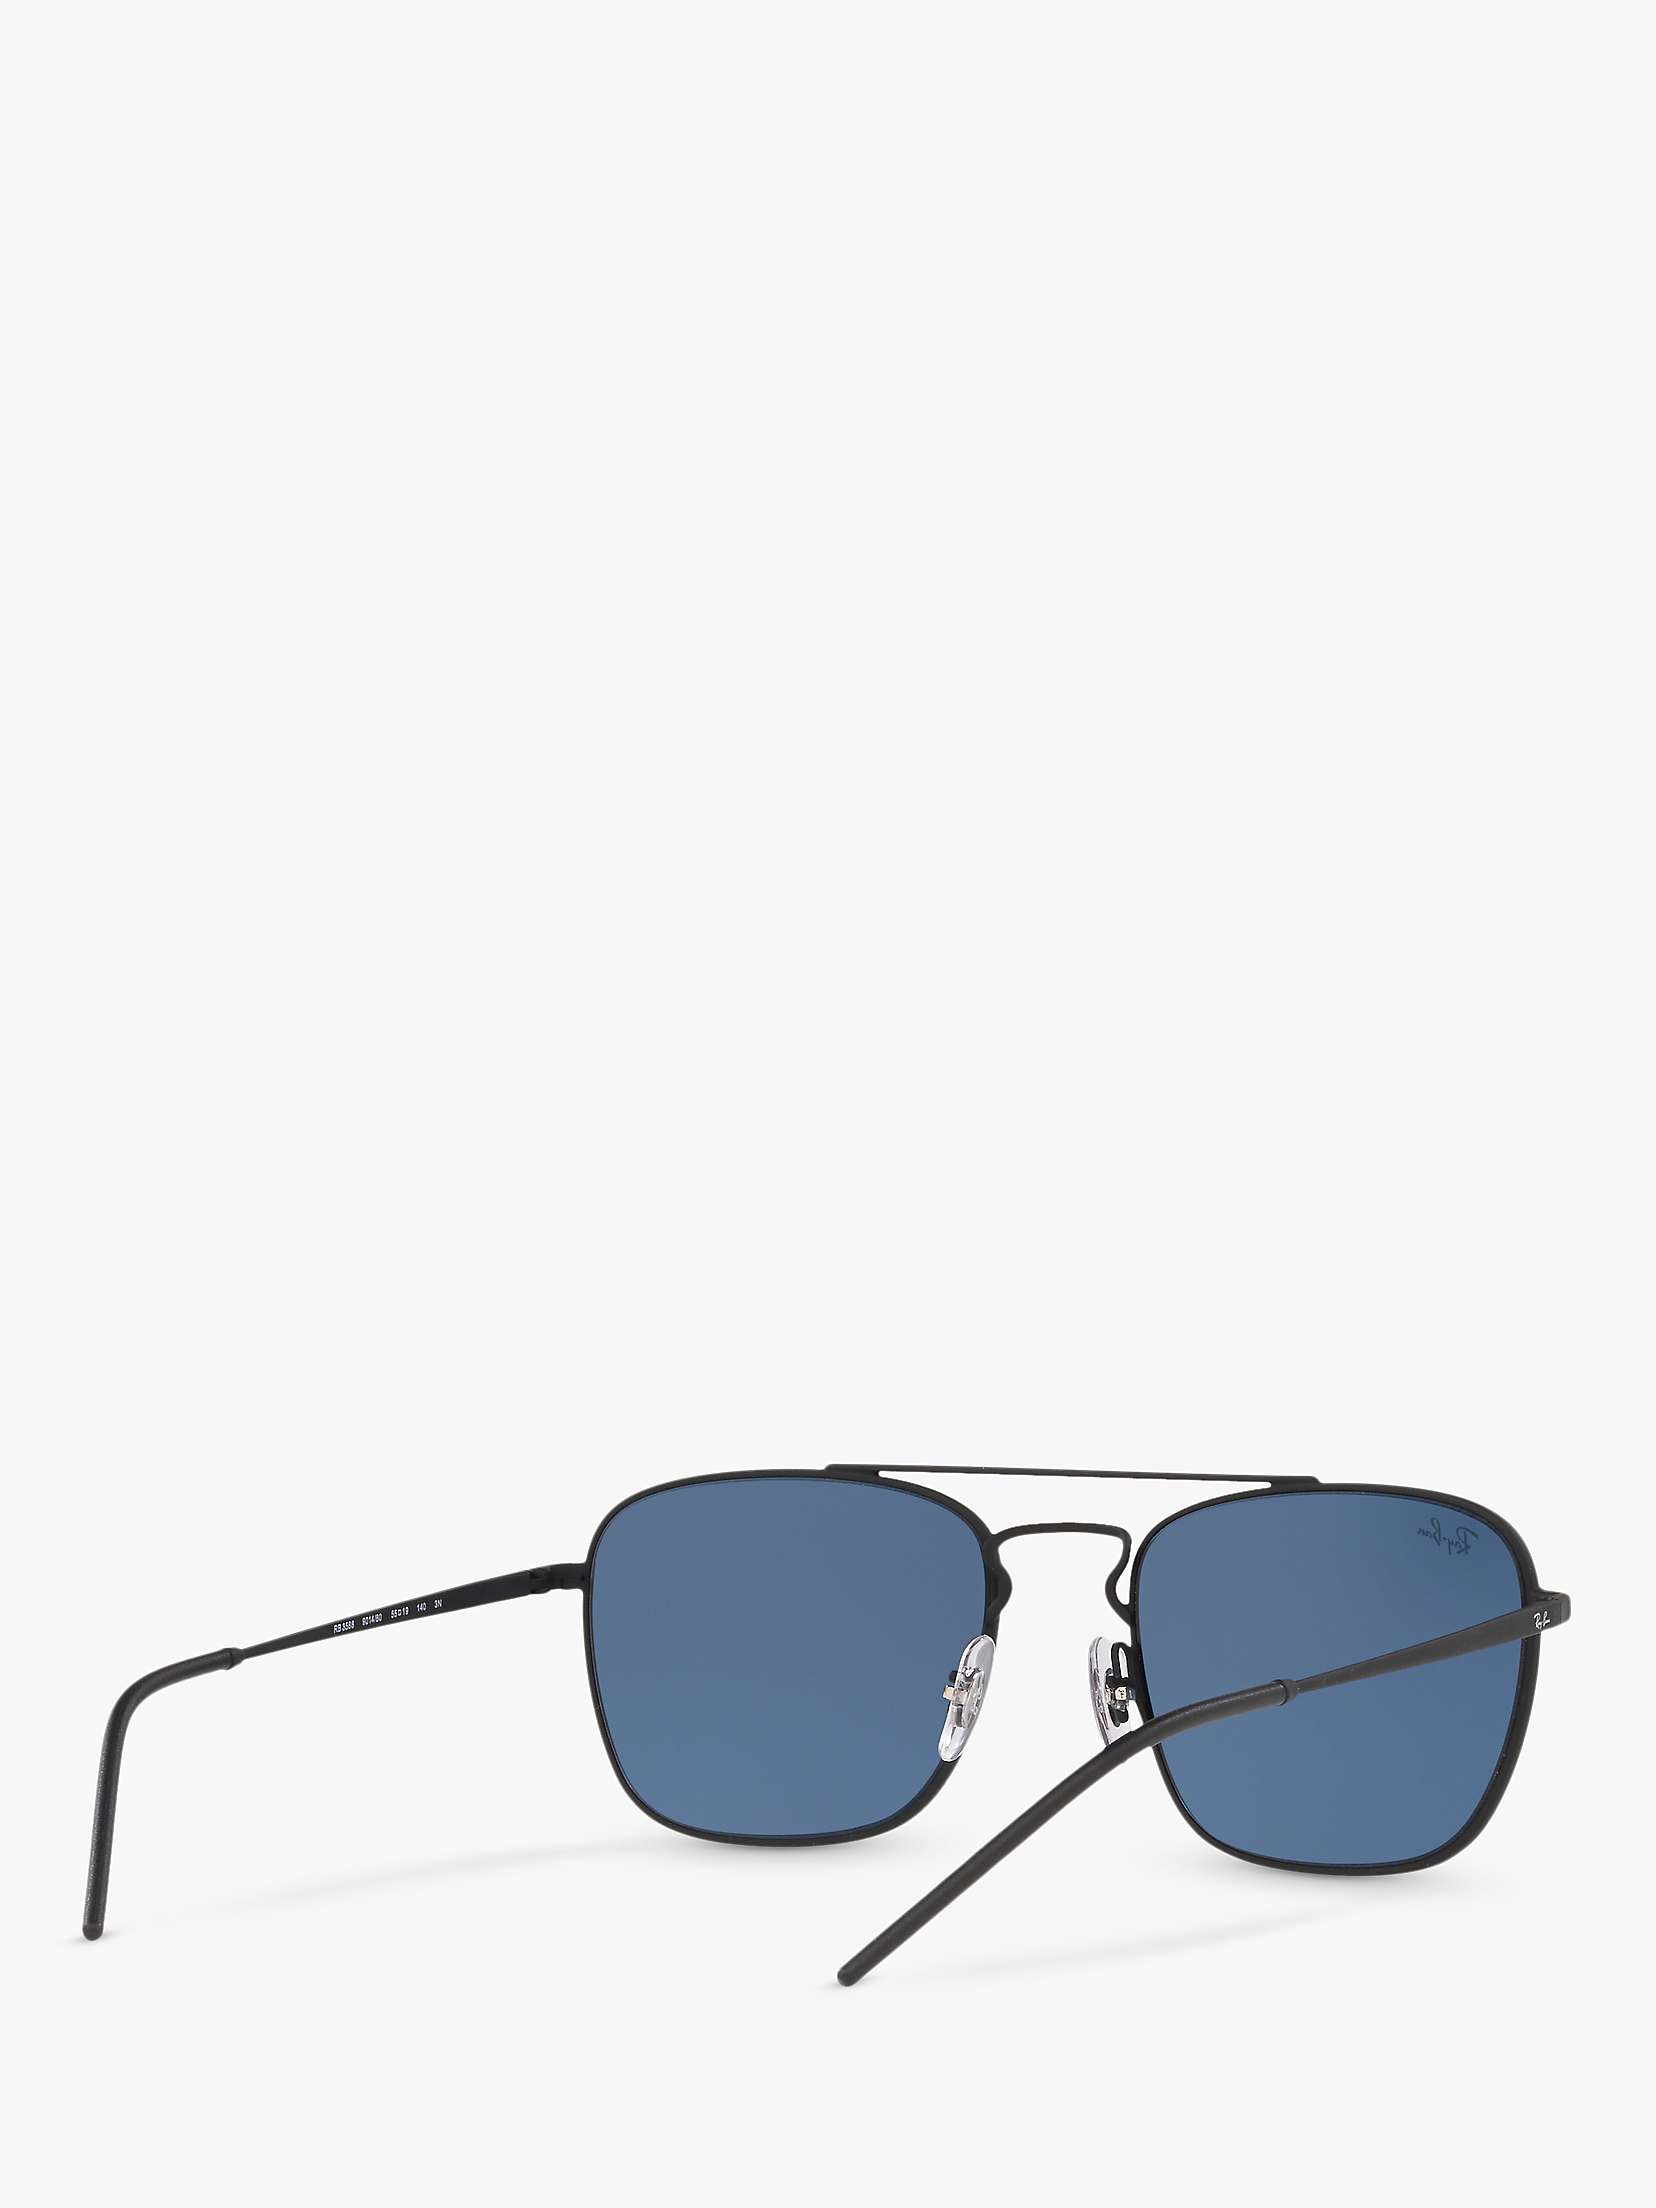 Buy Ray-Ban RB3588 Men's Square Sunglasses Online at johnlewis.com